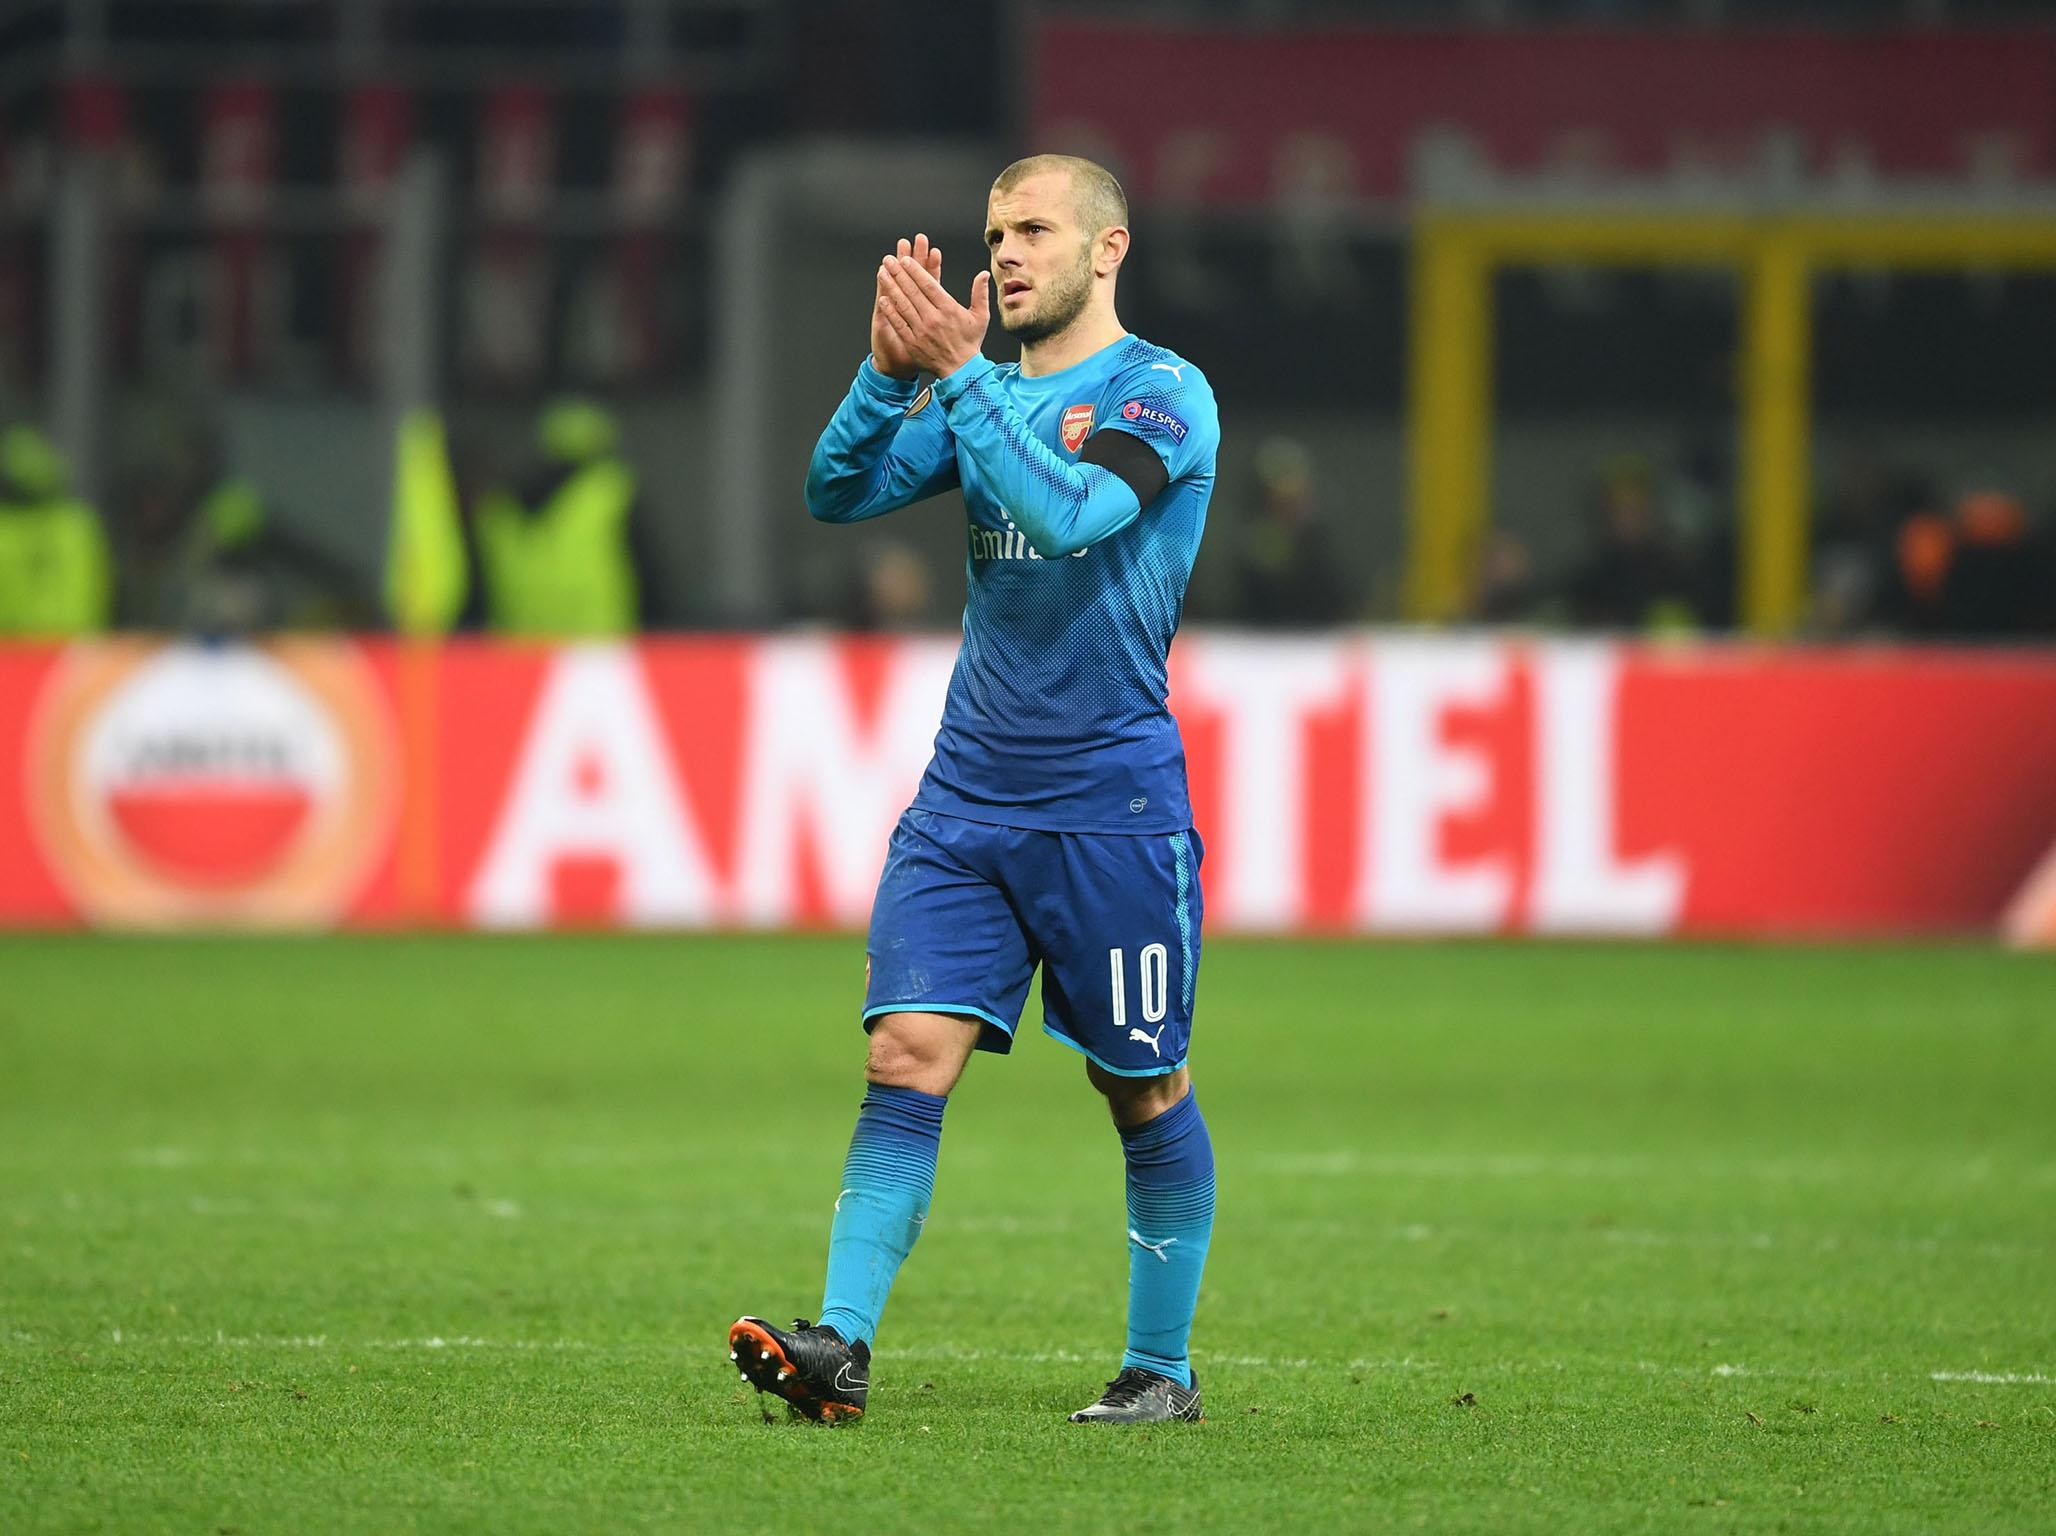 Jack Wilshere pours doubt on Arsenal future with revelation he is &apos;no closer&apos; to agreeing new contract